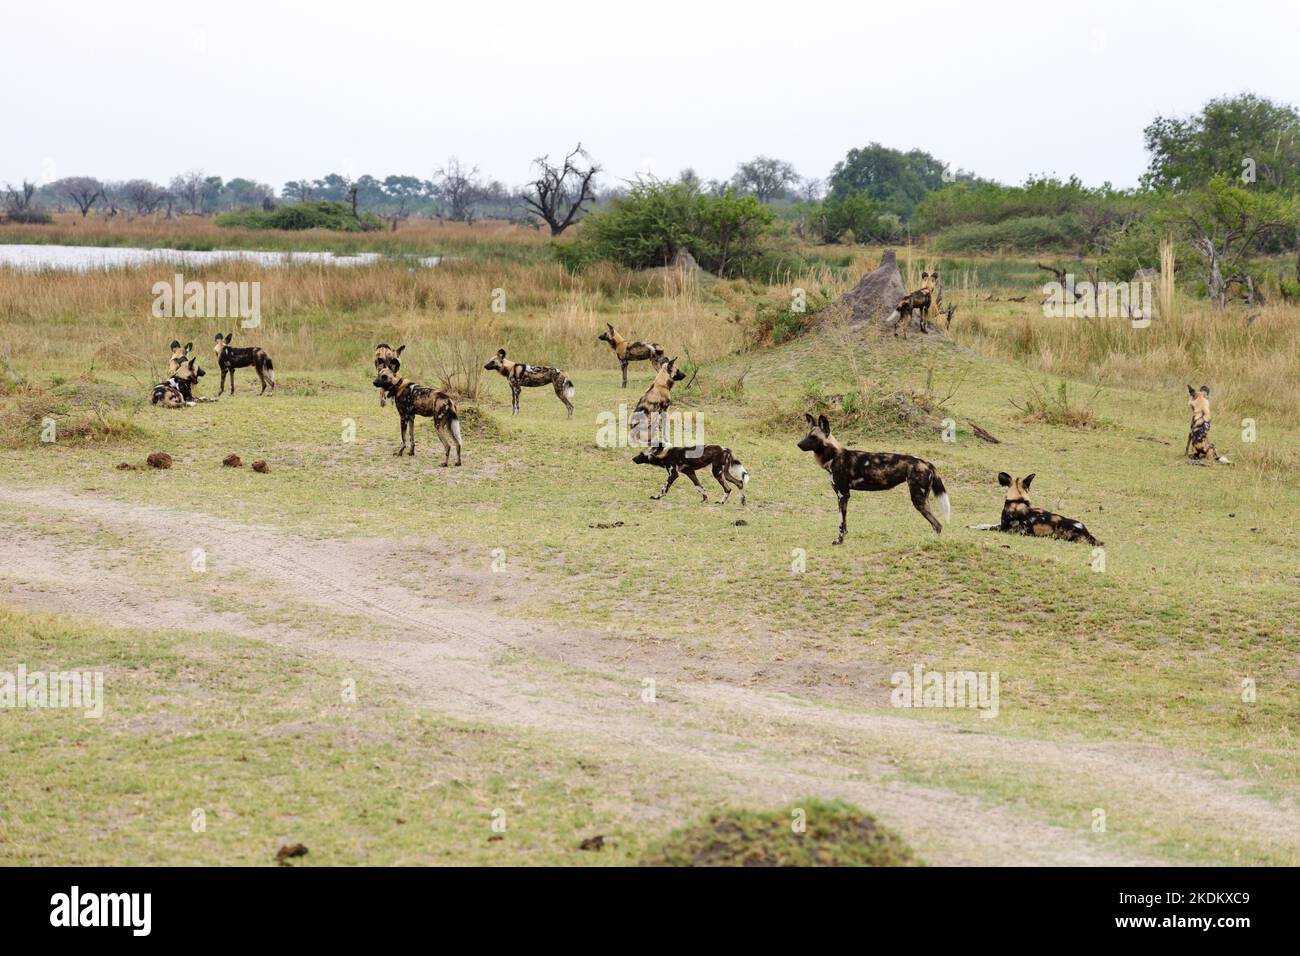 African Wild Dog pack, Lycaon pictus, endangered species, group of African wild dogs in Moremi Game Reserve, Okavango Delta, Botswana Africa Stock Photo